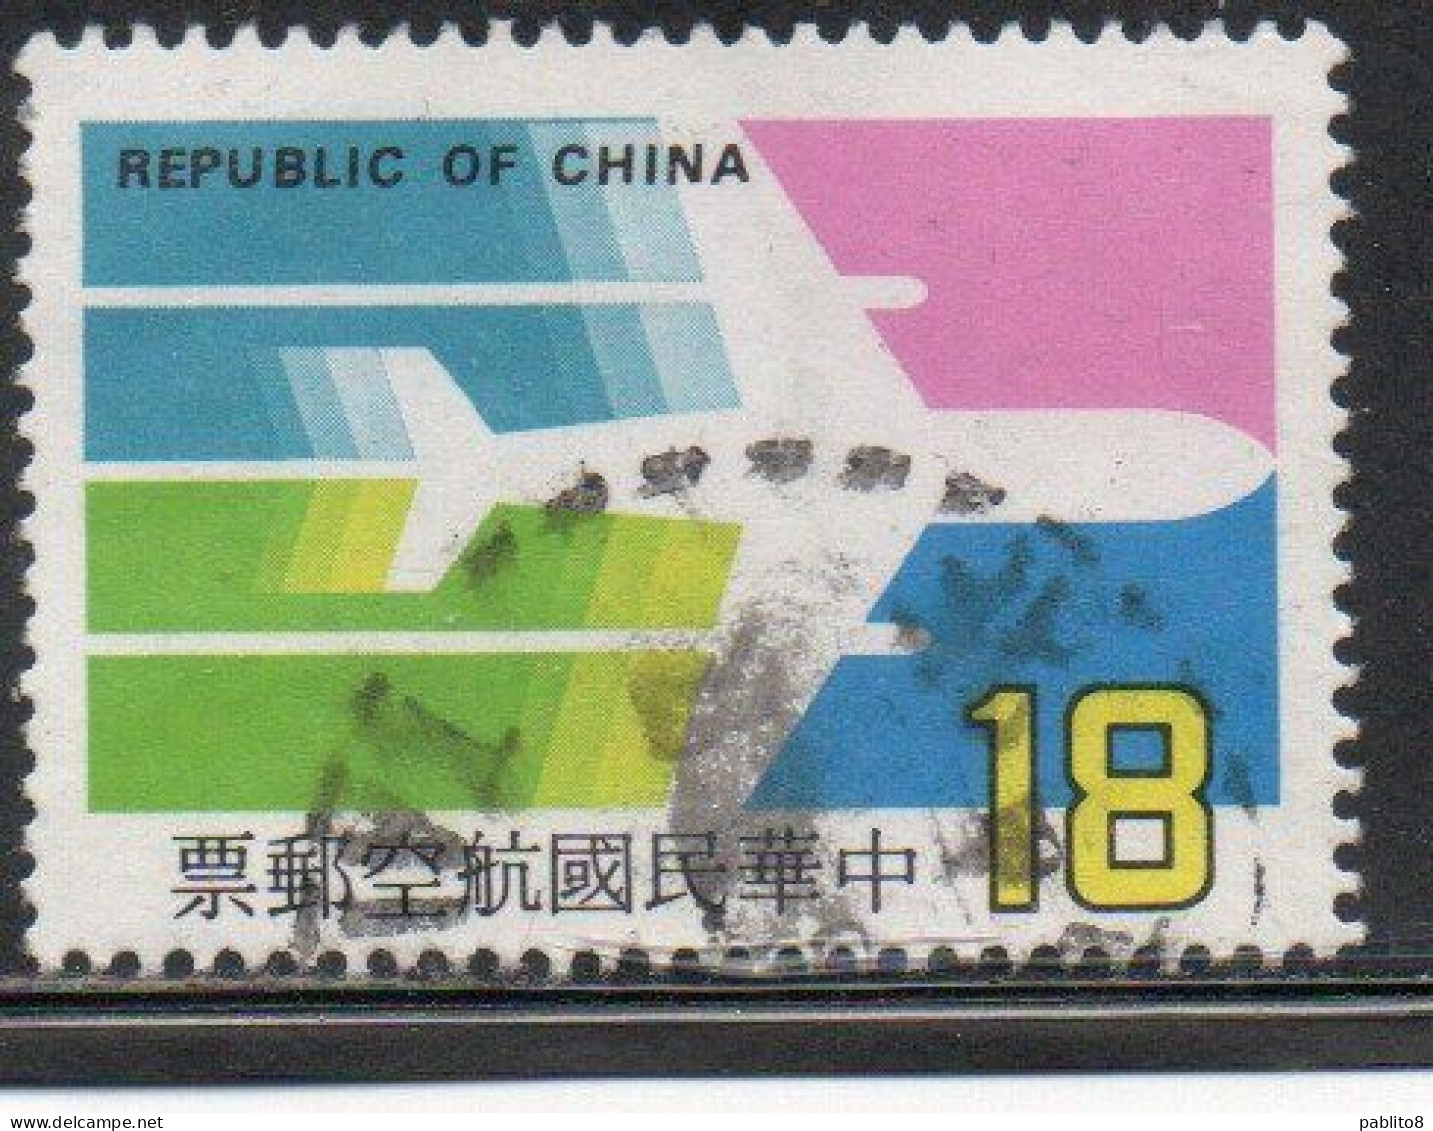 CHINA REPUBLIC CINA TAIWAN FORMOSA 1987 AIR POST MAIL AIRMAIL AIRPLANE 18$ USED USATO OBLITERE' - Luchtpost